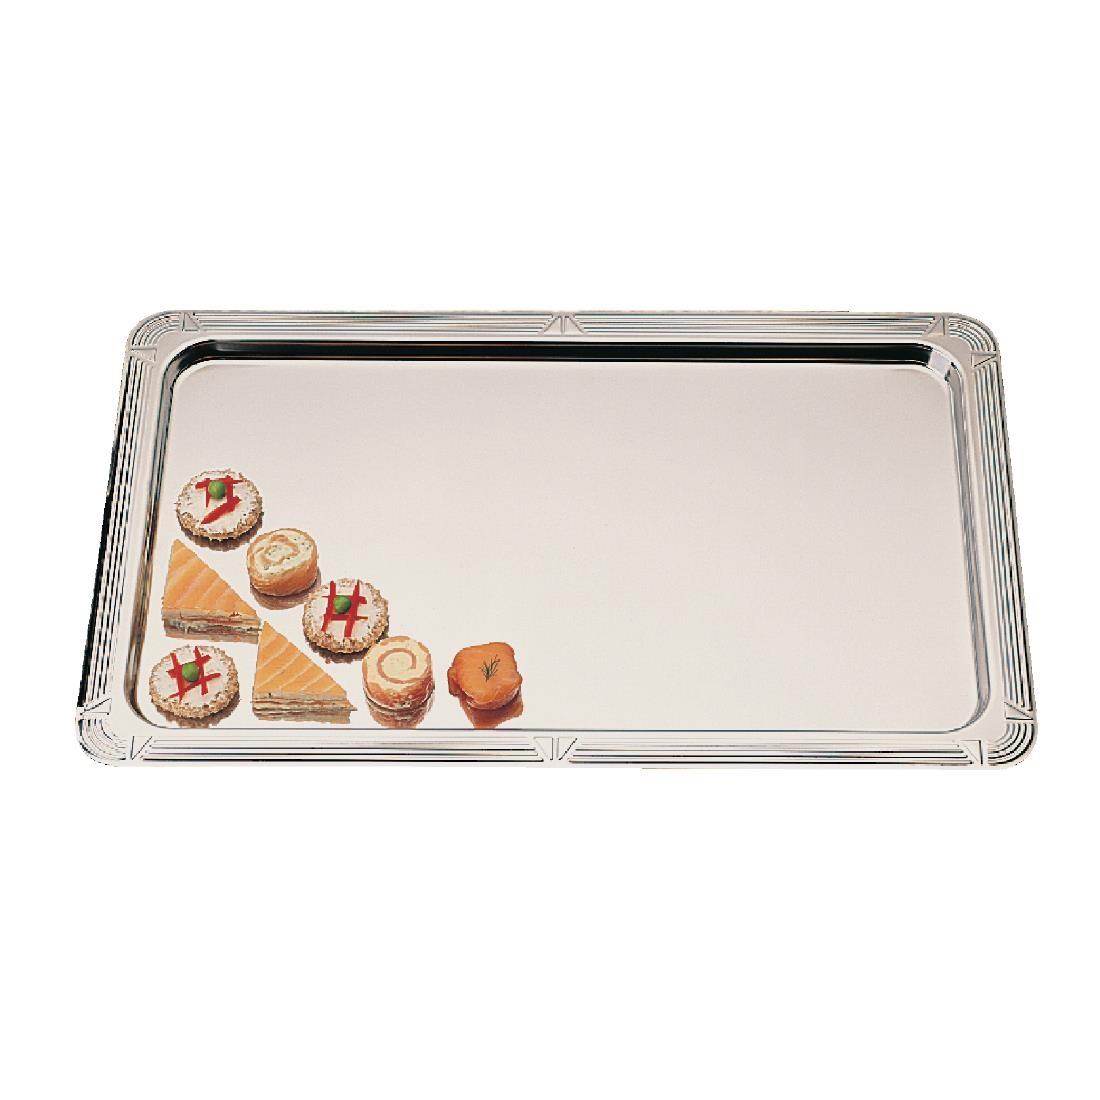 APS Stainless Steel Buffet Service Tray GN 1/1 - P929  - 1